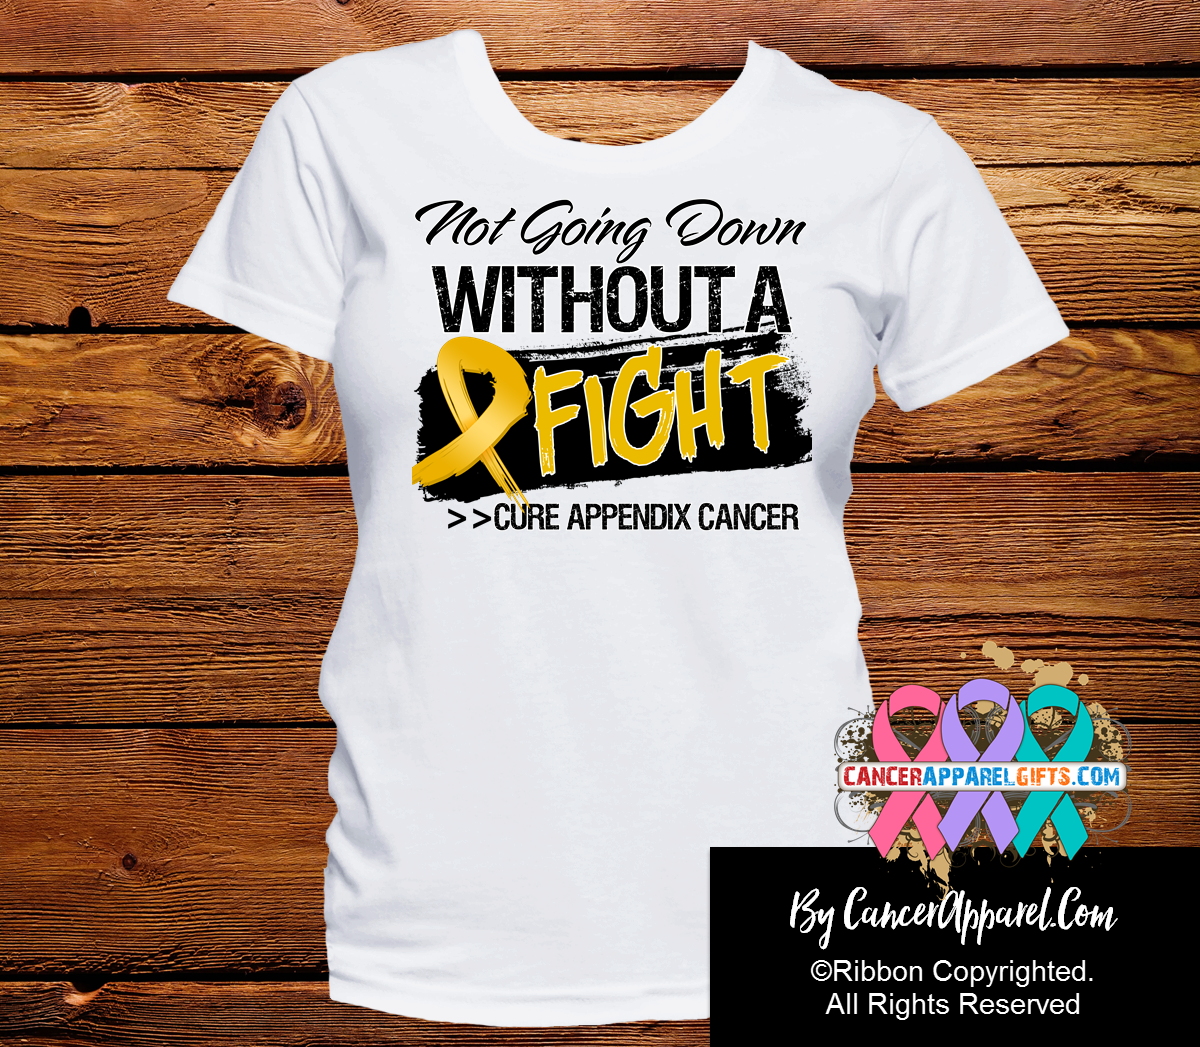 Appendix Cancer Not Going Down Without a Fight Shirts - Cancer Apparel and Gifts